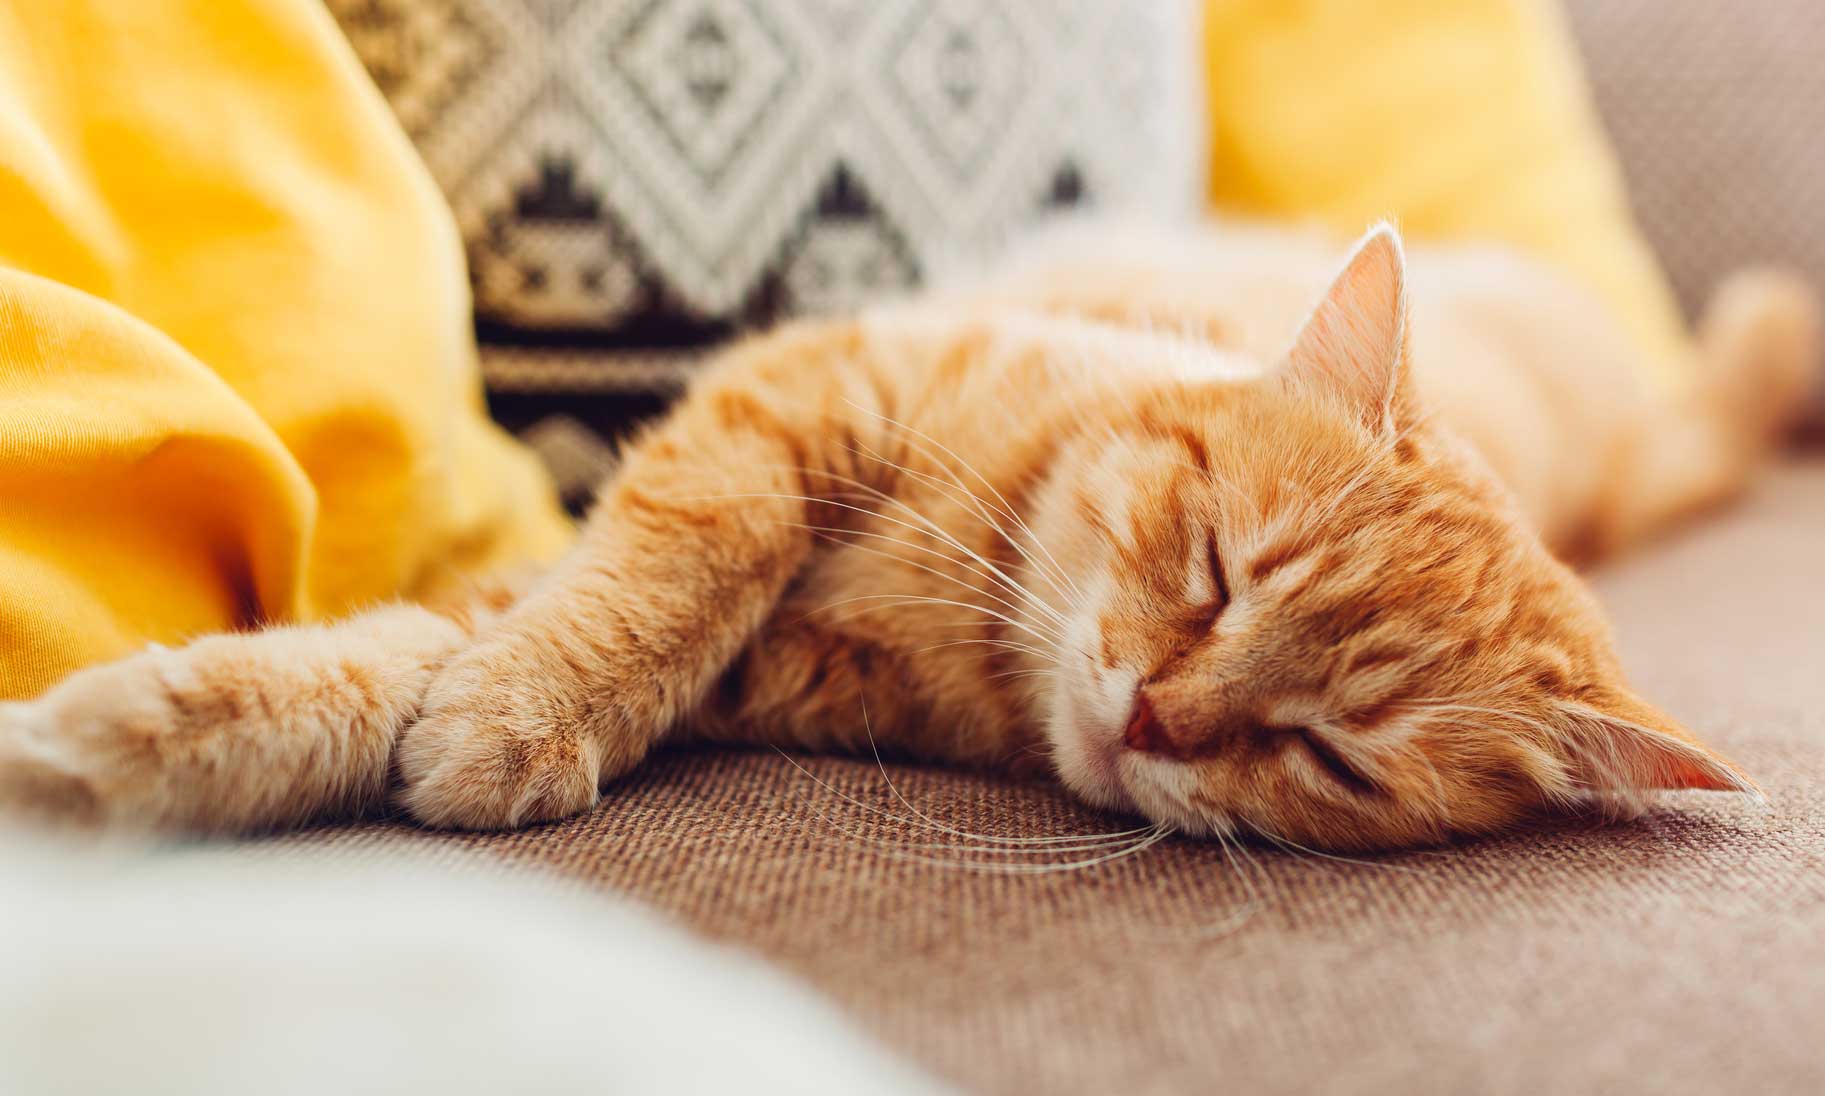 overheating in cats: cat sleeping on couch